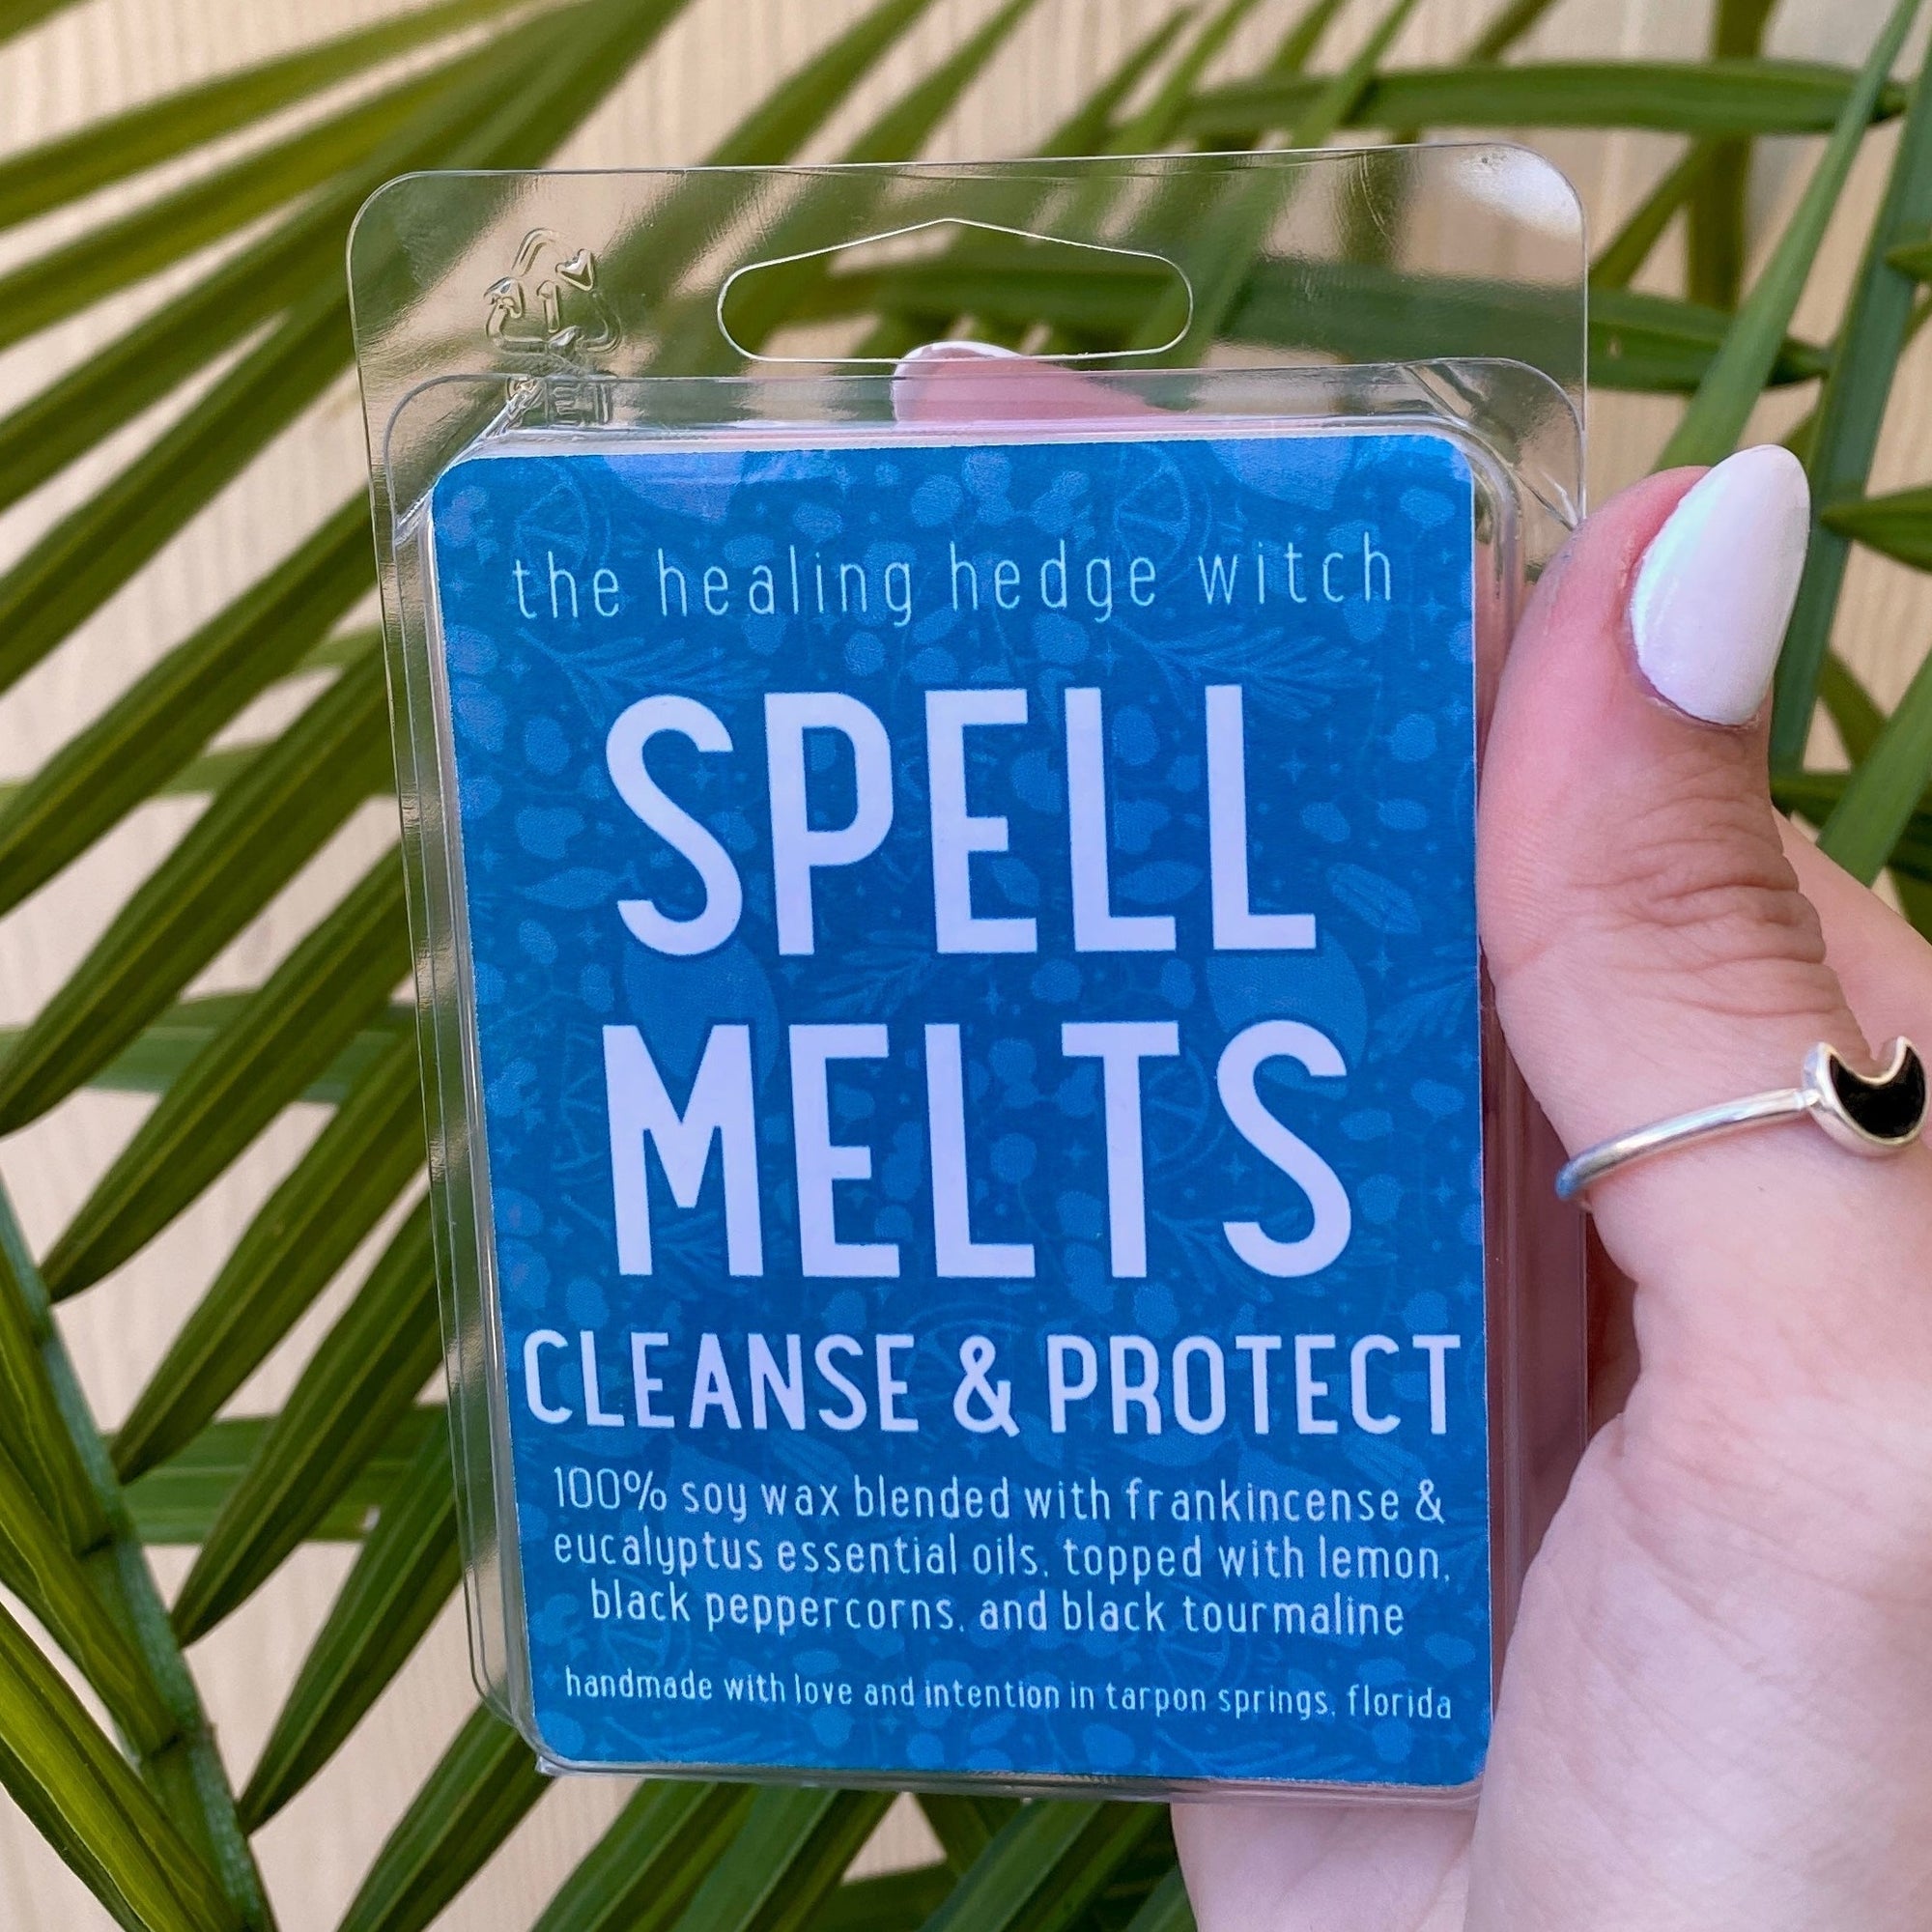 Cleanse & Protect Spell Melts